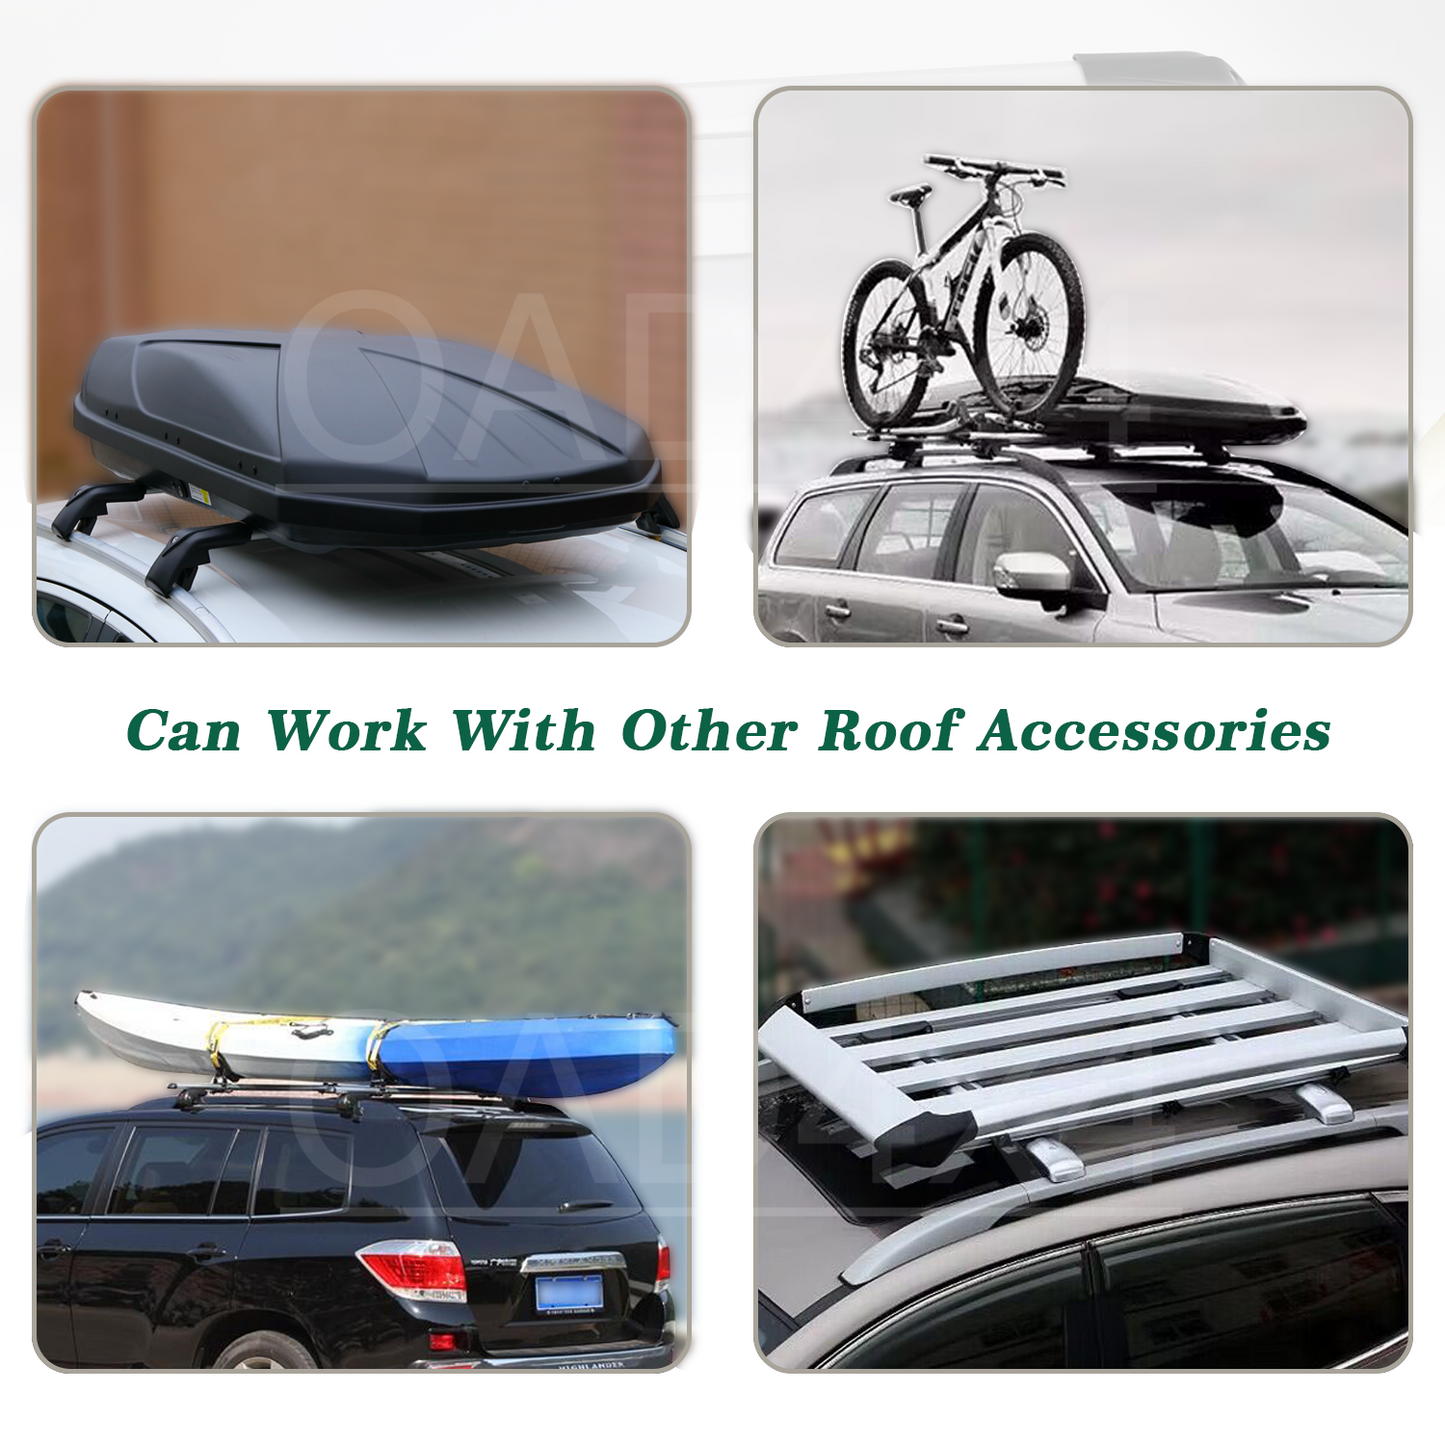 OAD 1 Pair Aluminum Silver Cross Bar Roof Racks Baggage holder for Ford Explorer with raised roof rail